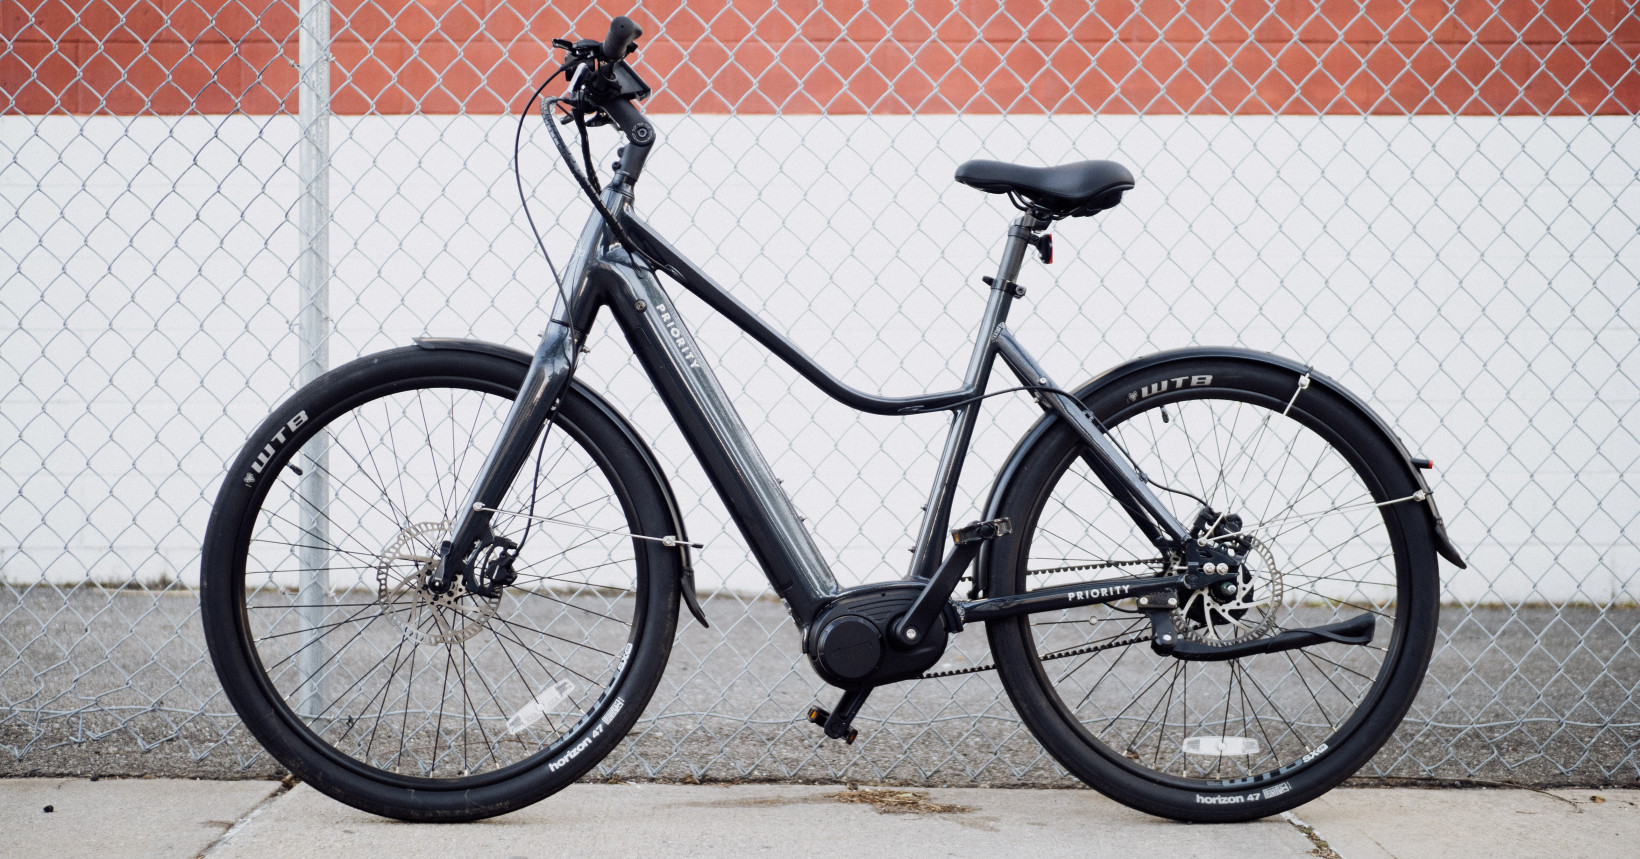 Review The Priority Current ebike excels at both smoothness and power